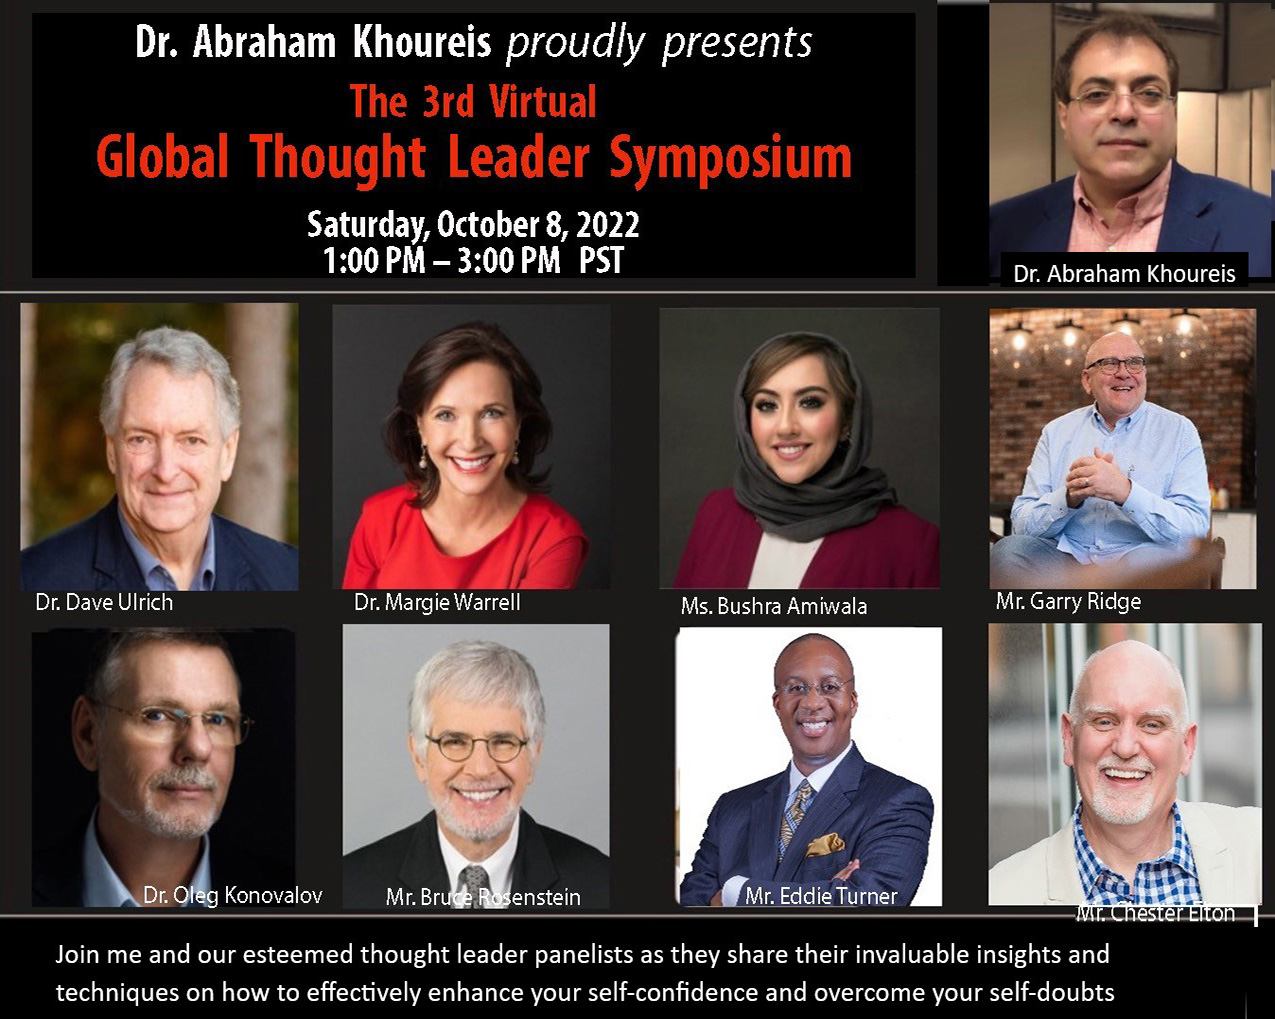 The 3rd Virtual Global Thought Leader Symposium Panel. To be updated with Panelistsd, Dr. Maja Zelihic and Ms. Lauren Ackerman